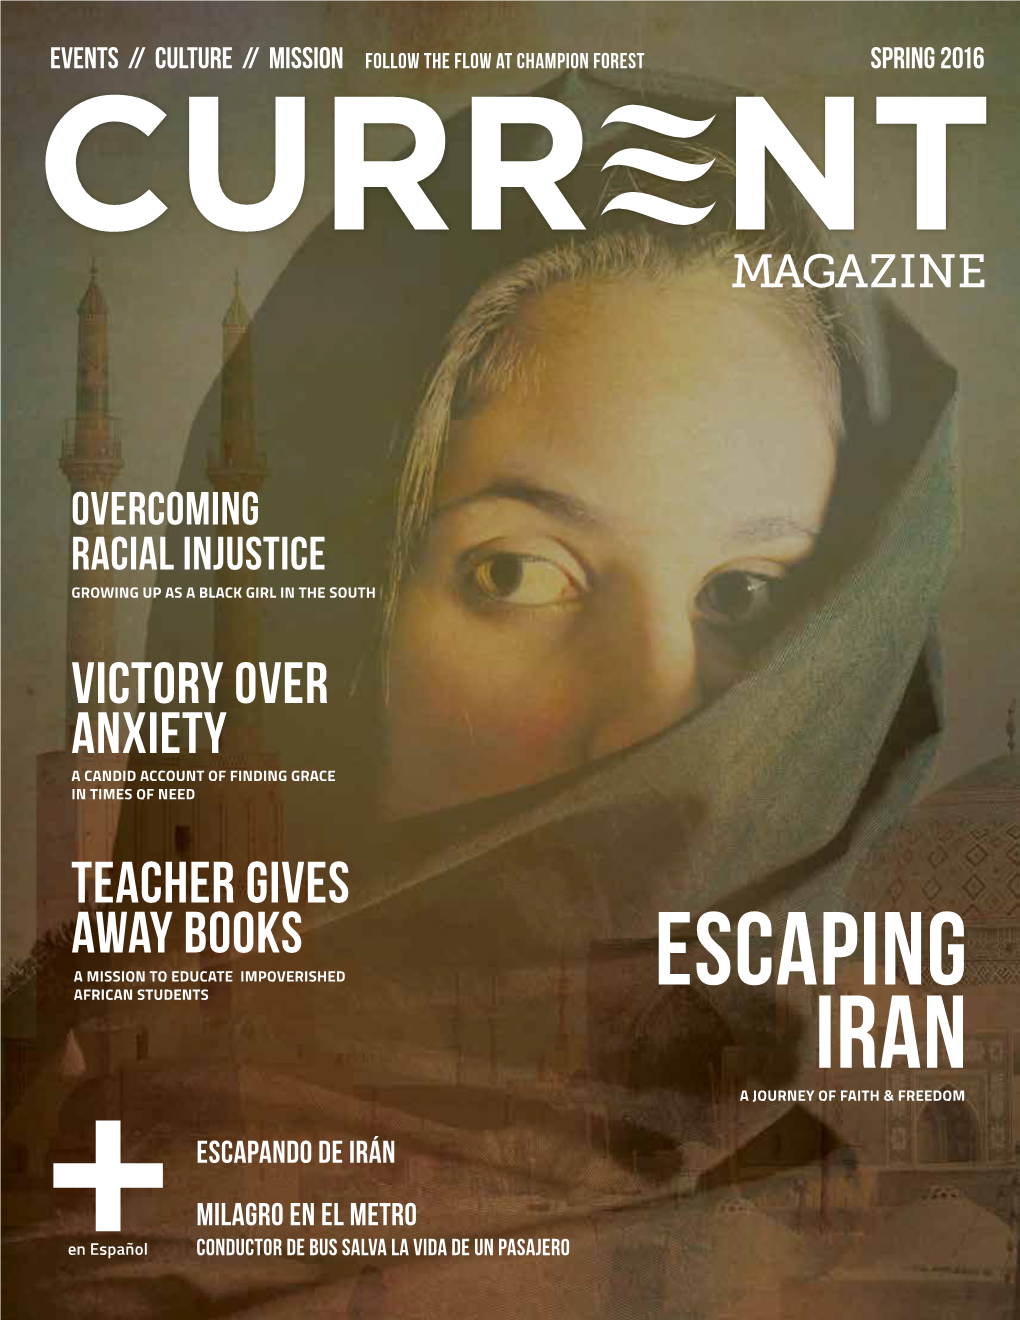 ESCAPING IRAN - a Journey of Faith and Freedom 12